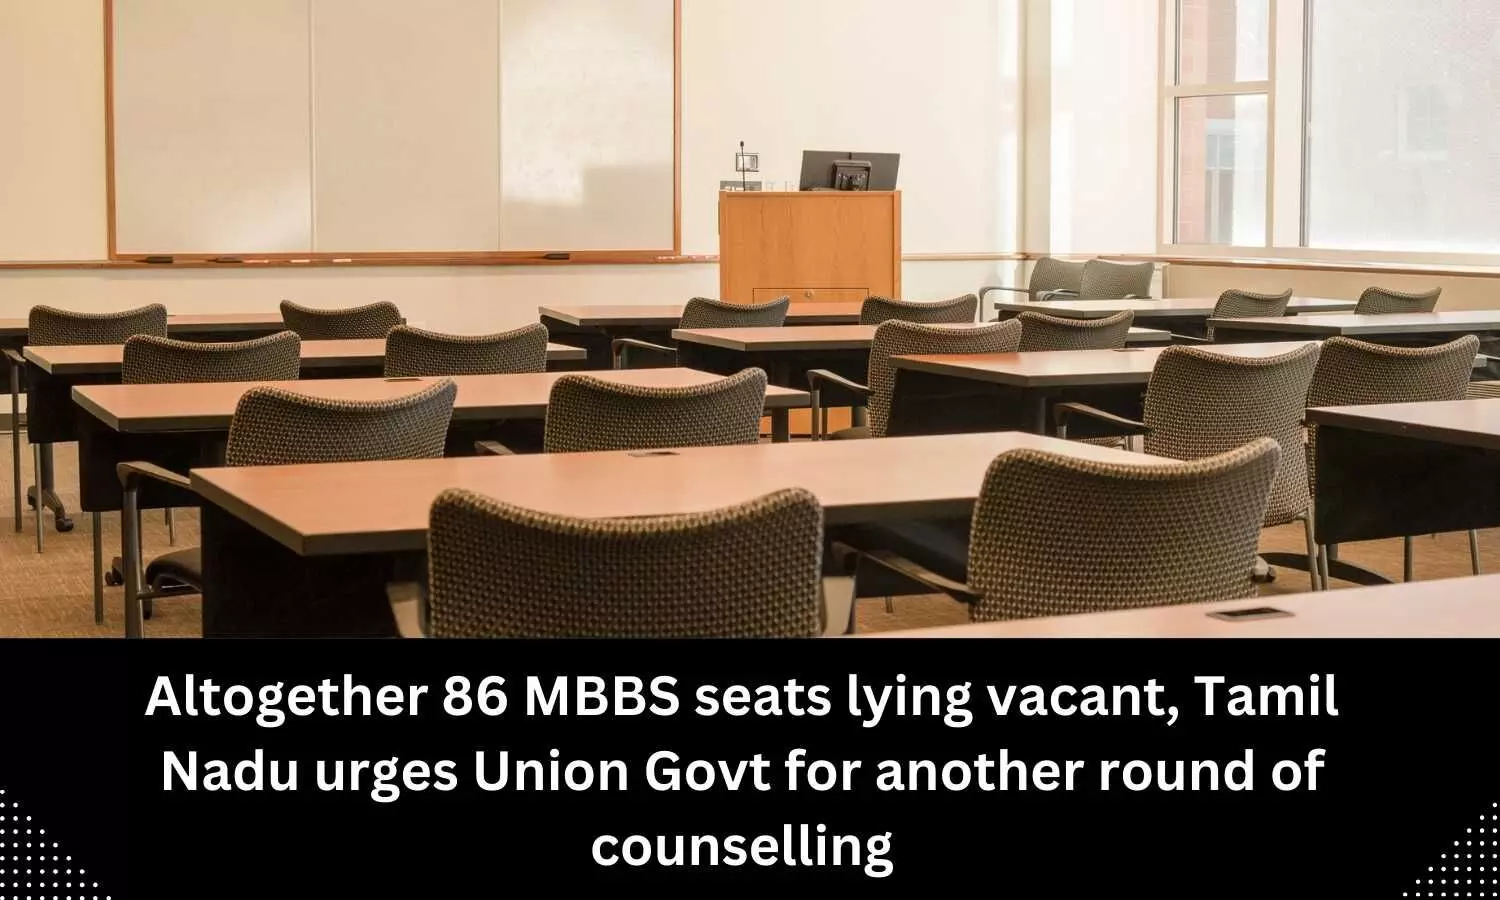 Altogether 86 MBBS seats lying vacant: Tamil Nadu Govt seeks extension of counselling deadline